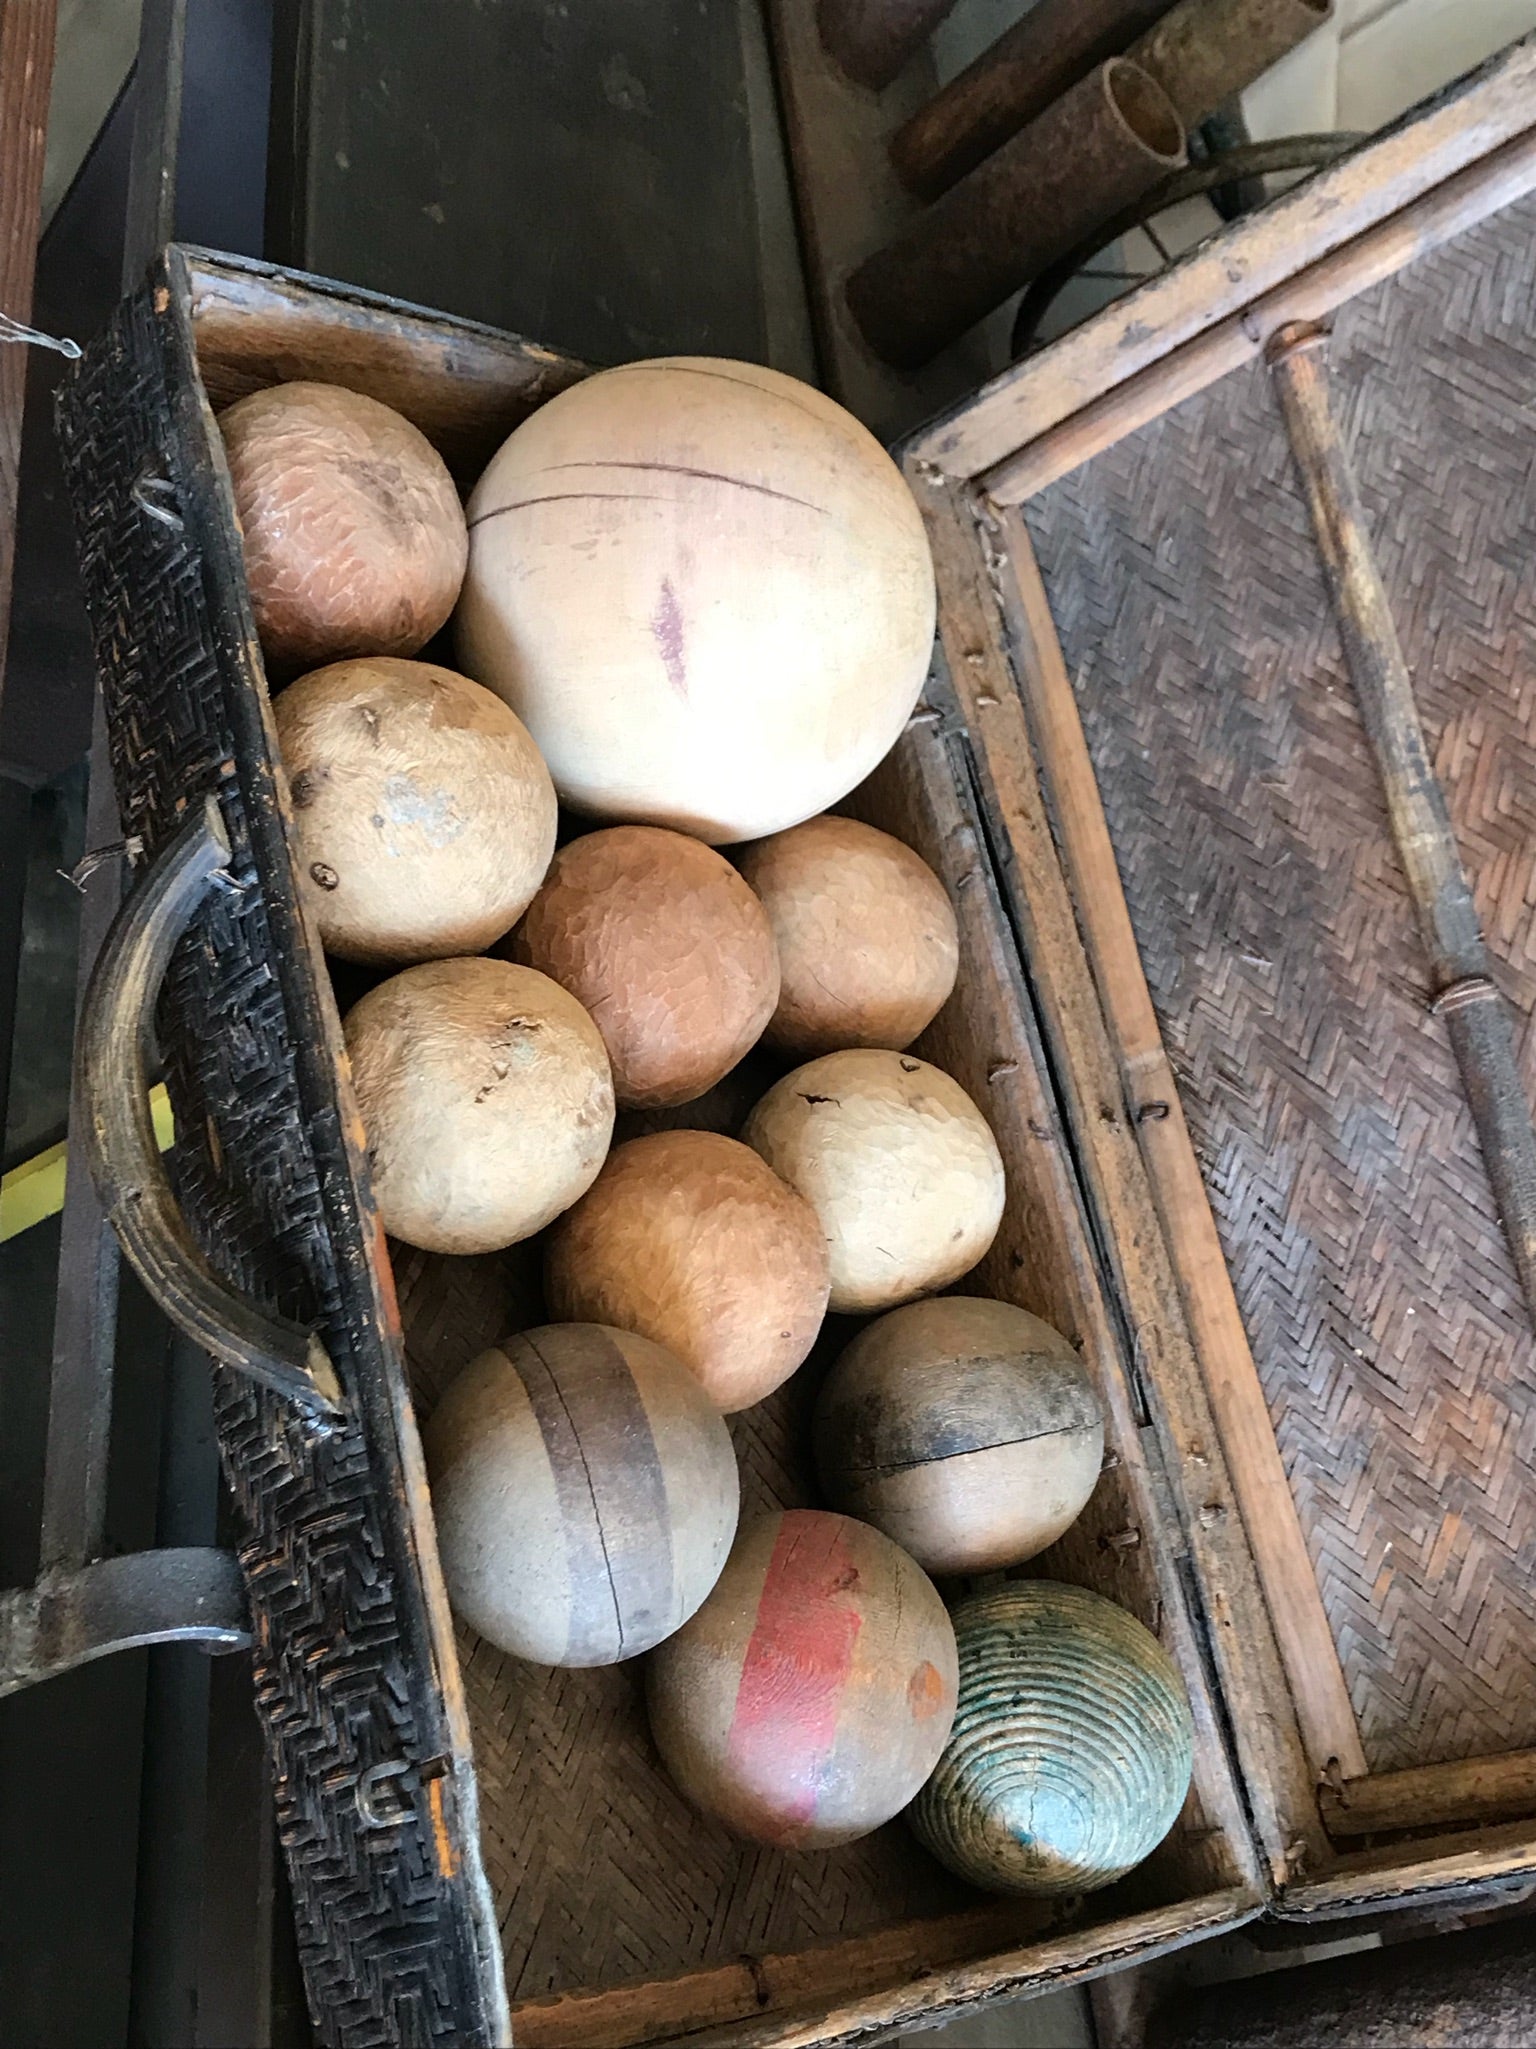 Vintage set of bocce balls

1 large, 7 small, 4 croquet - 12 total vintage condition.